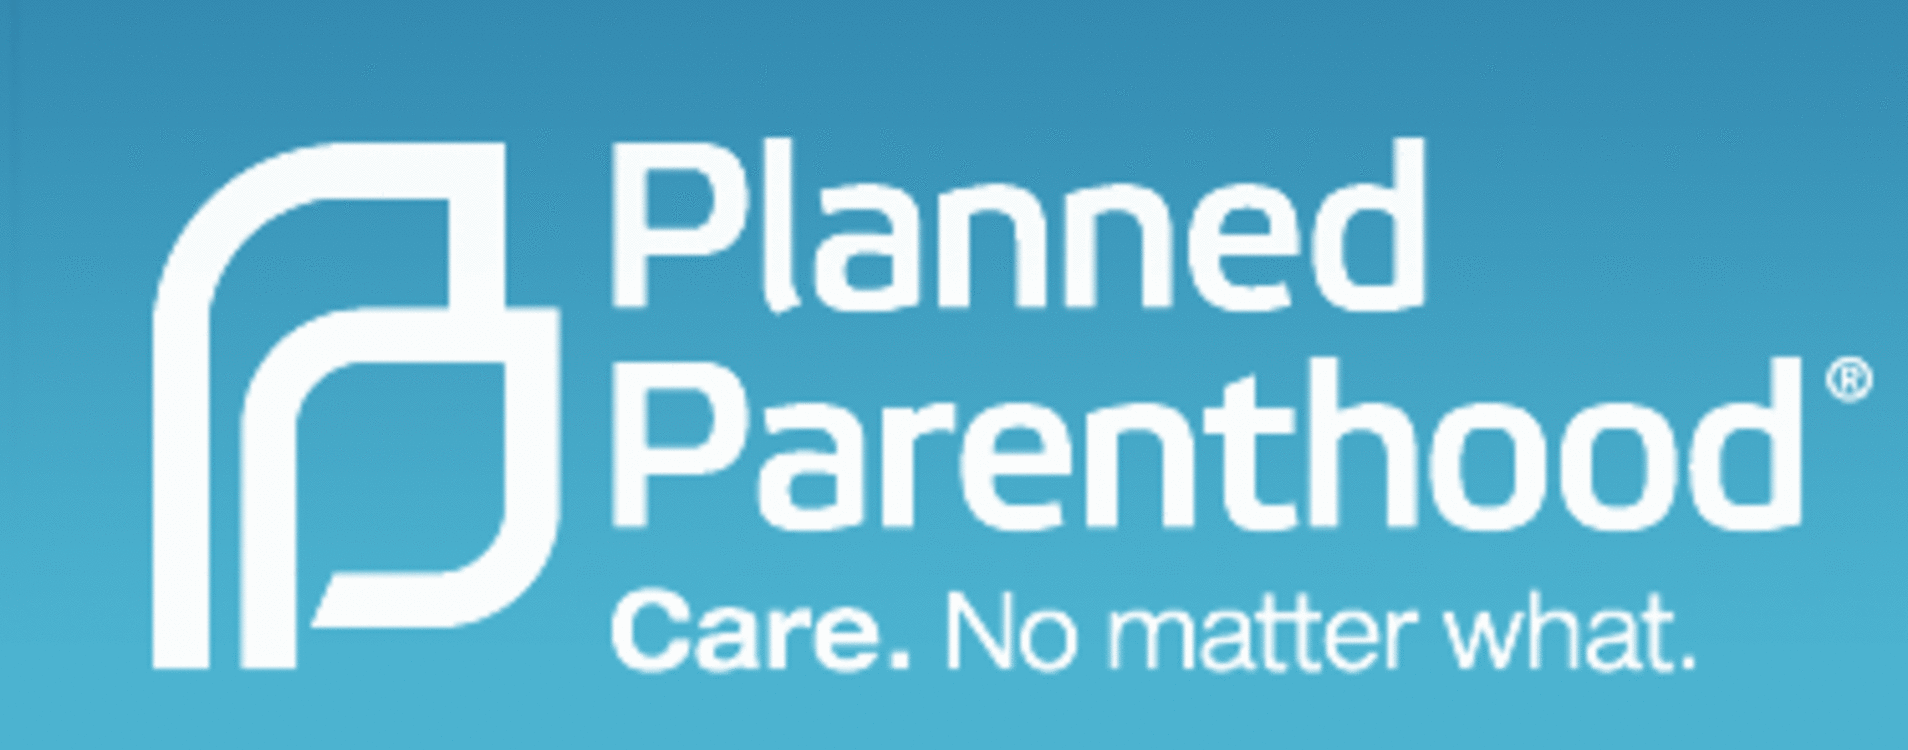 Image: Planned Parenthood logo. Photo courtesy of Planned Parenthood.